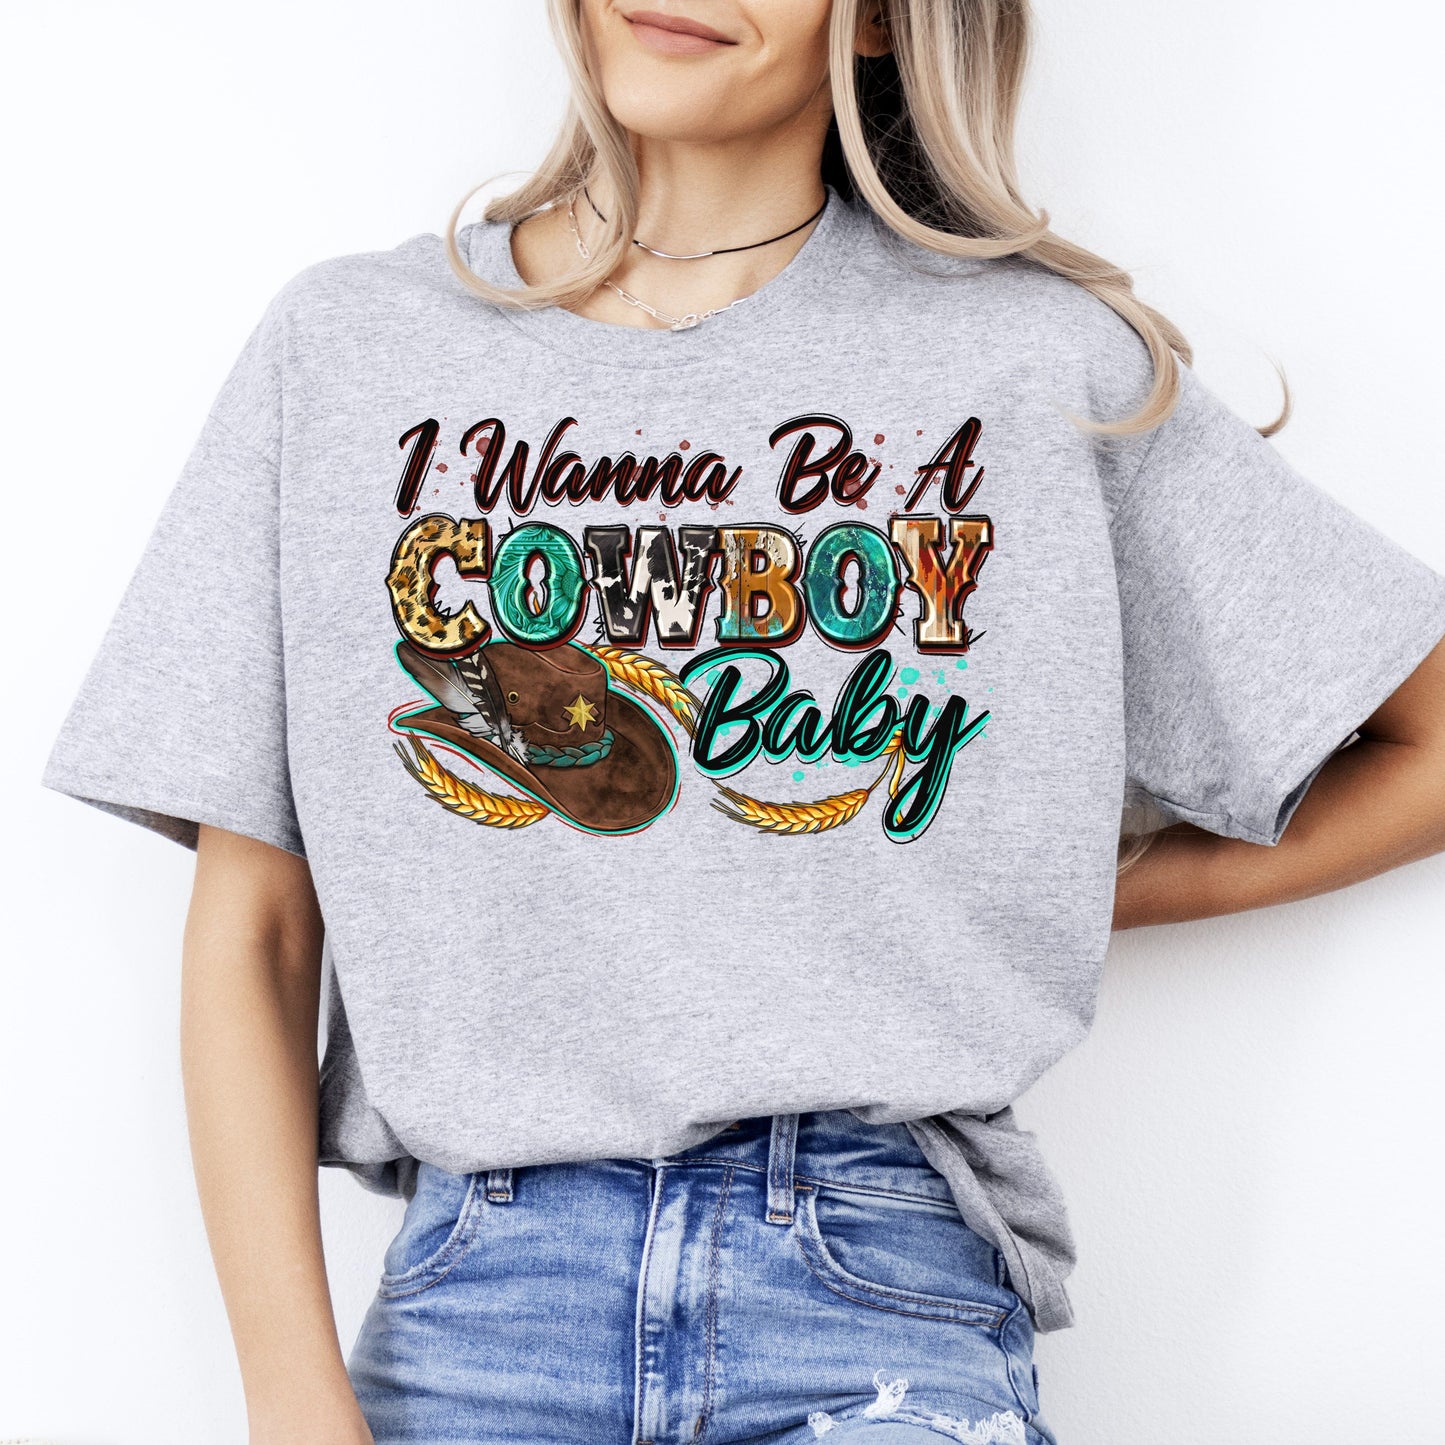 I wanna be a cowboy baby T-Shirt Cowboy girlfriend cowgirl Unisex Tee Sand White Sport Grey-Sport Grey-Family-Gift-Planet